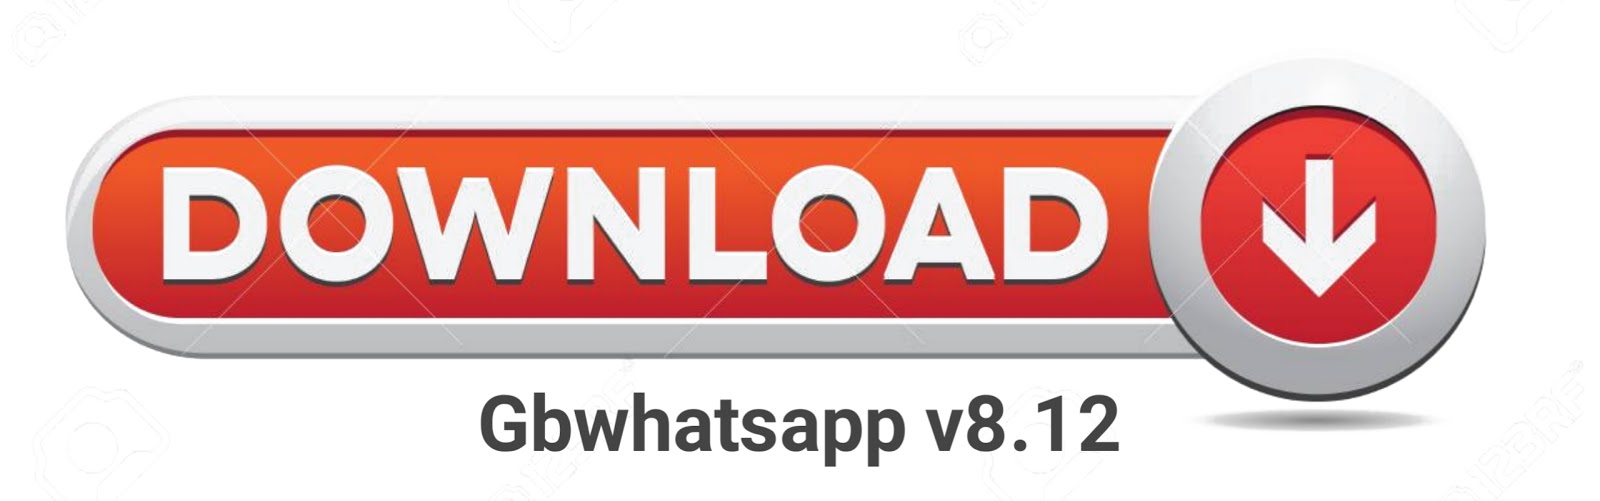 Latest Gbwhatsapp V8.12 download page